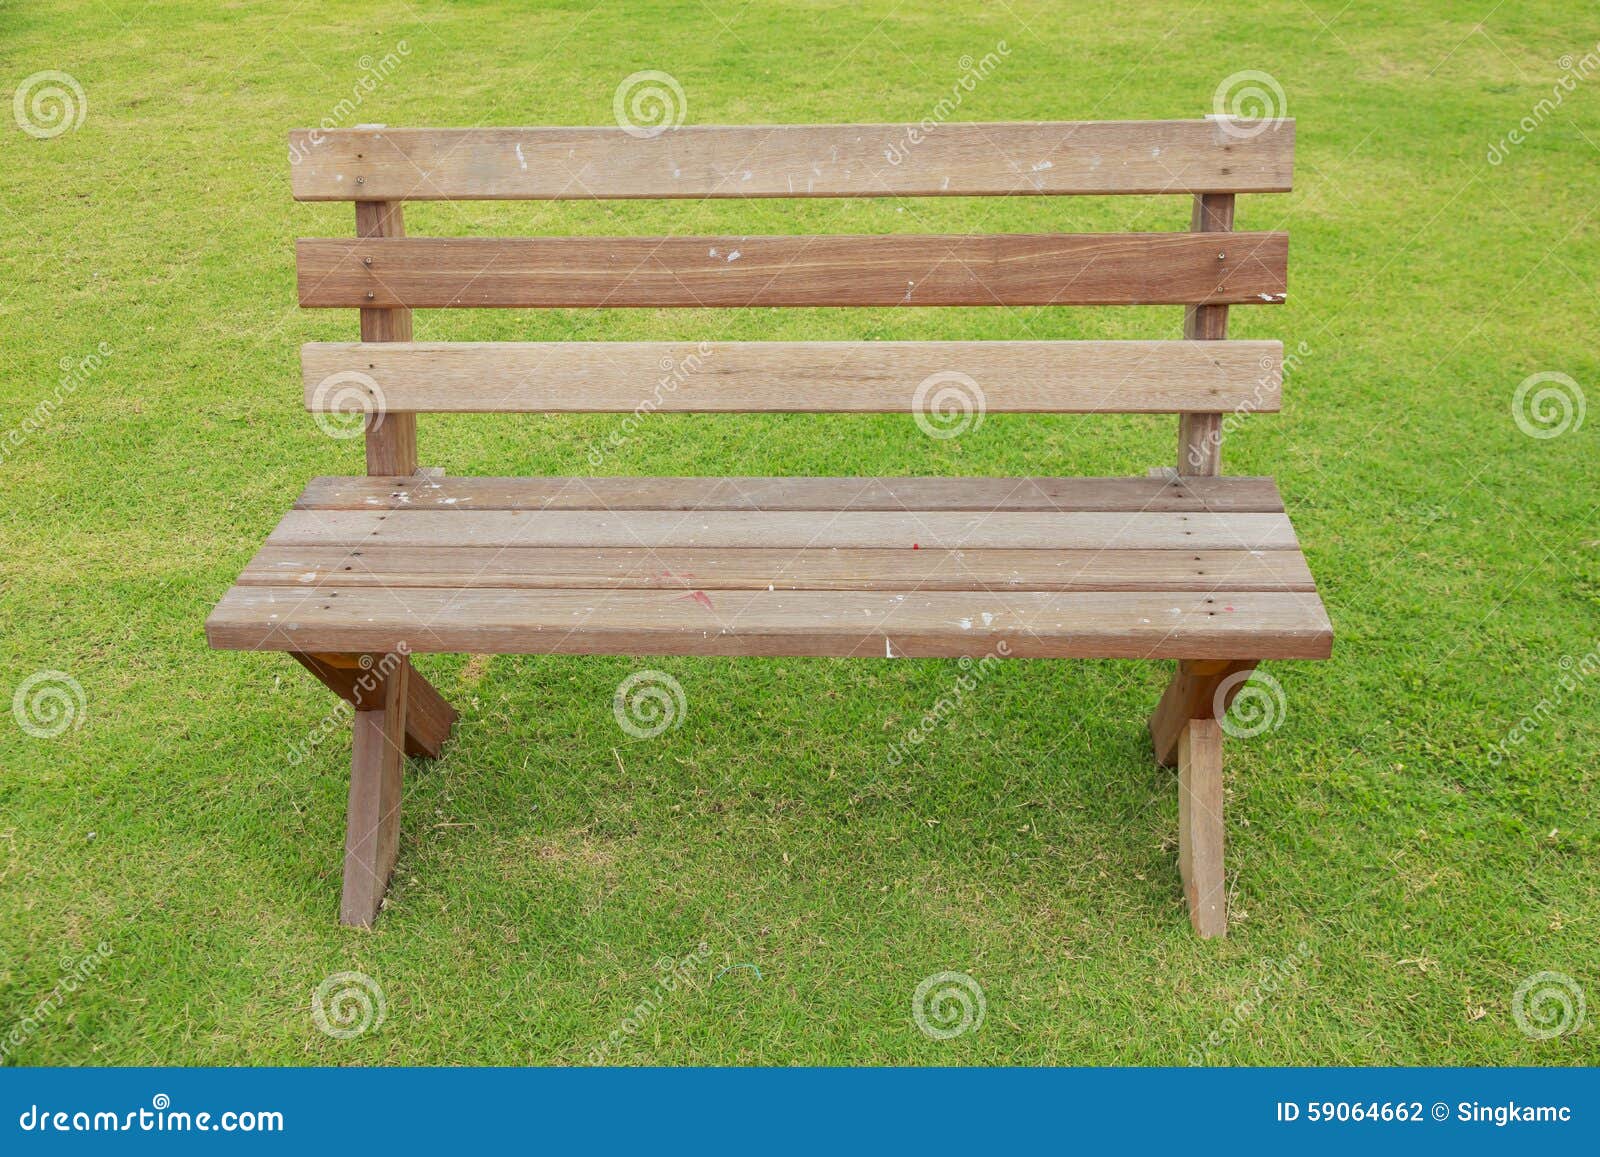 Stock Photo:wood Chair on Nature Green Grass Background Stock Photo - Image  of single, relax: 59064662